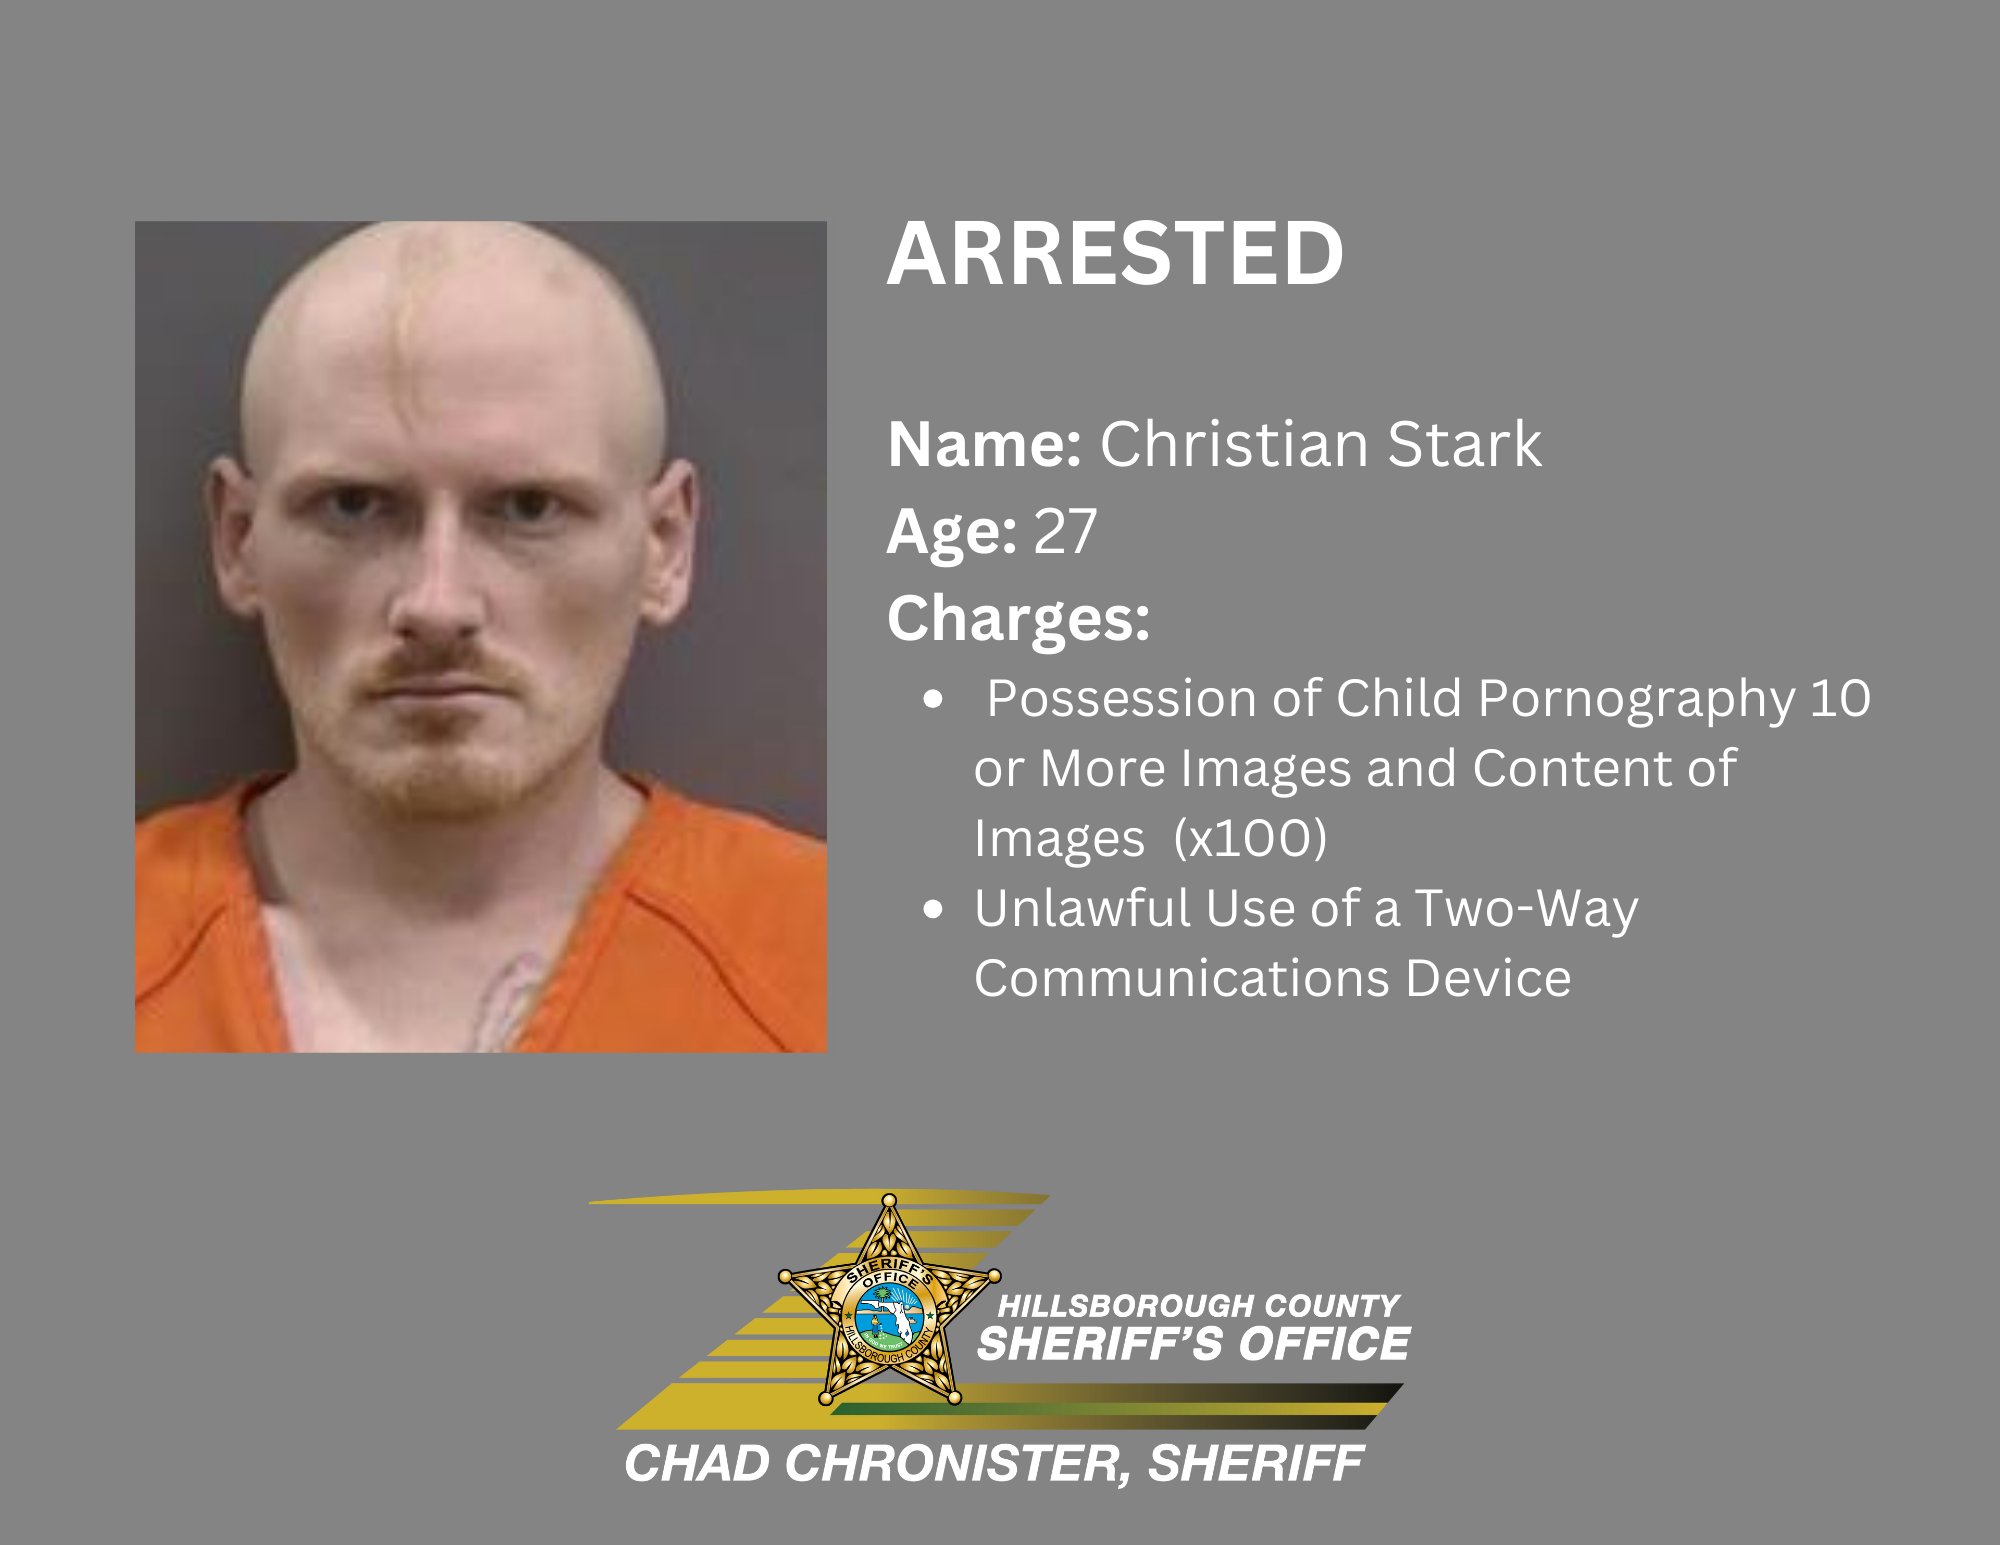 MAN ARRESTED FOR POSSESSION OF  CHILD PORNOGRAPHY